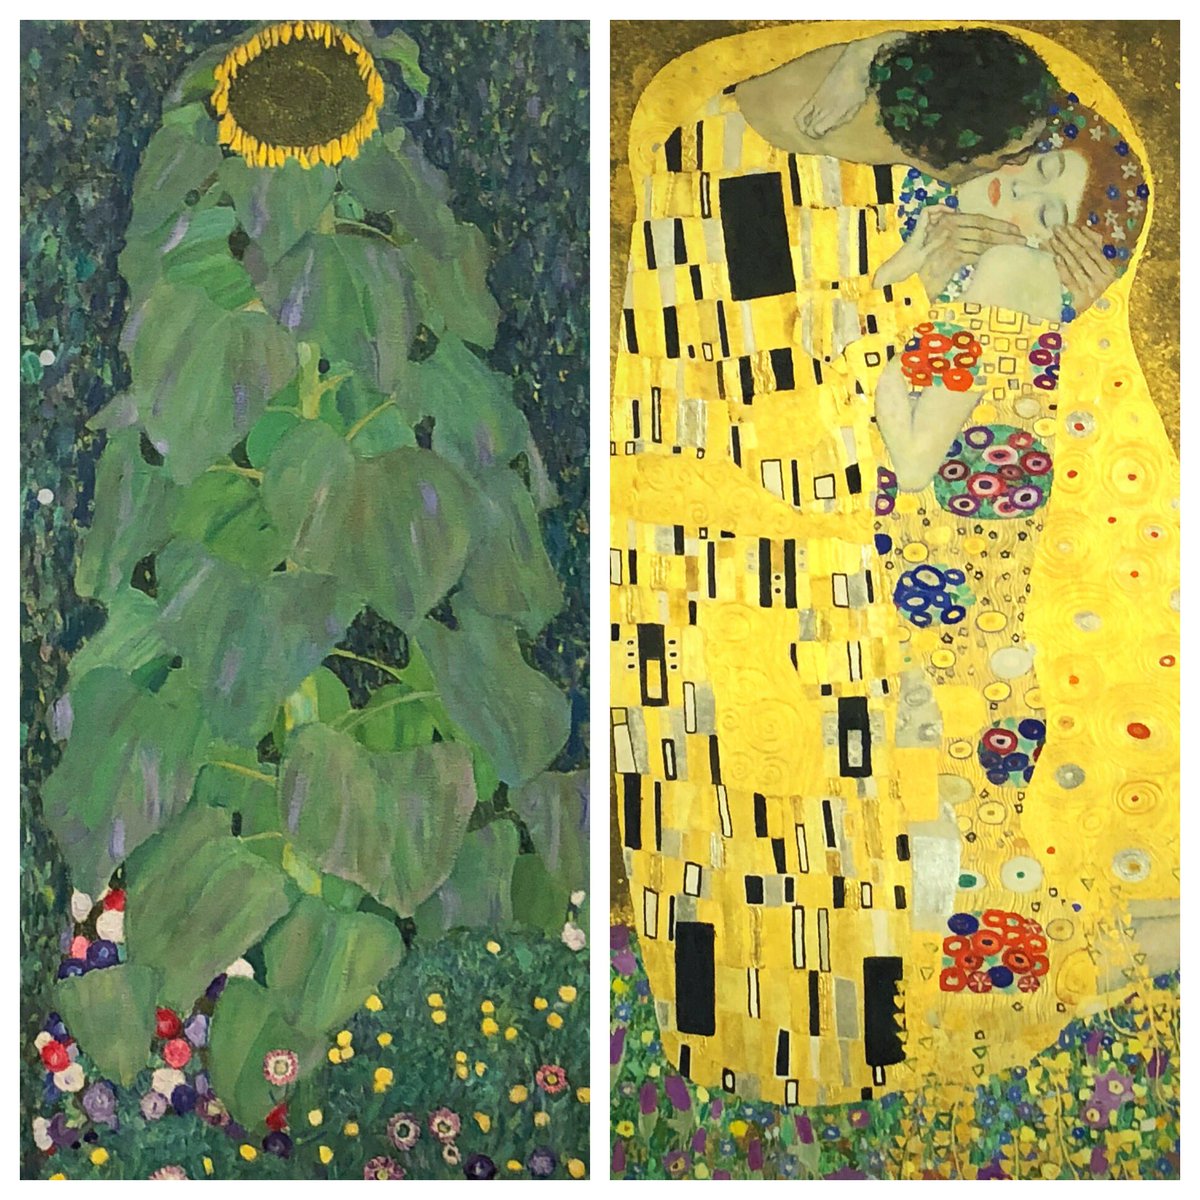 Life should be full of sunflowers and kisses! Just like the amazing art of Gustov Klimt as seen The Belvedere in Vienna! #TravelTheWorld #MagicinArt